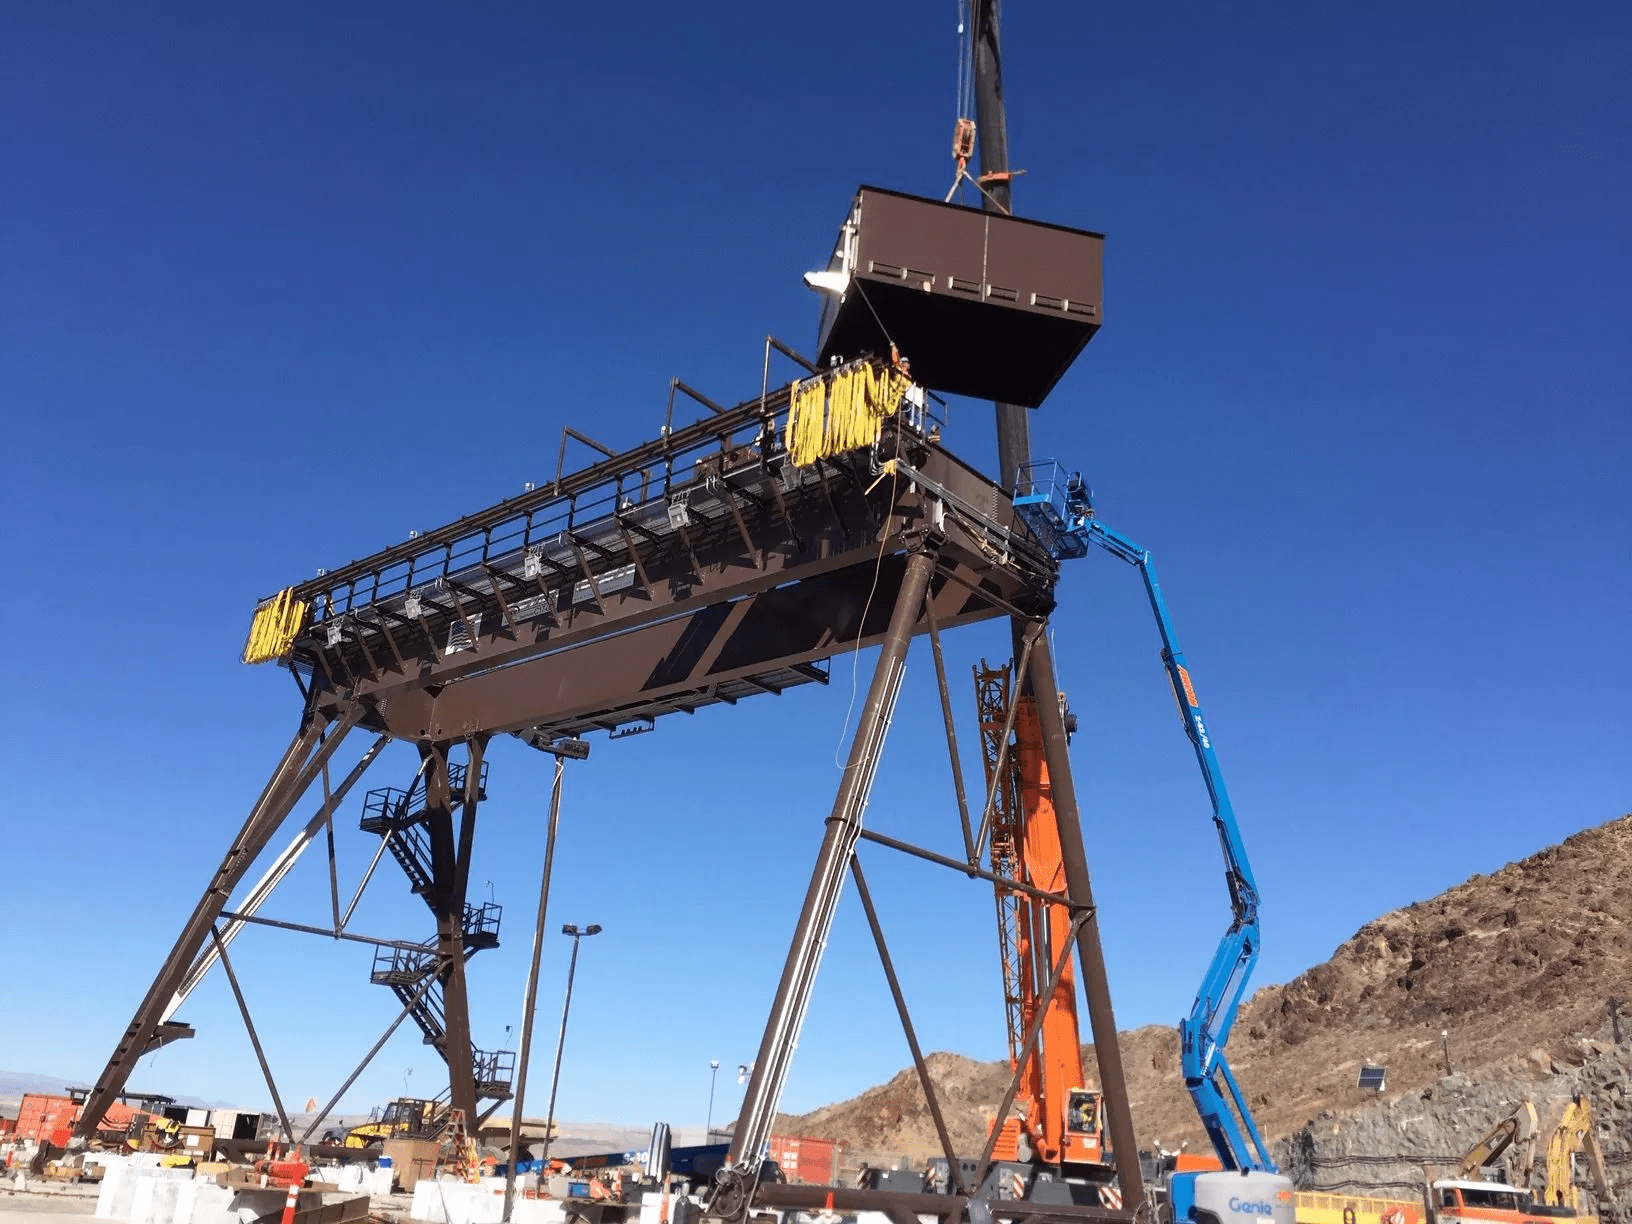 Crane being used to dismantle a very tall piece of machinery